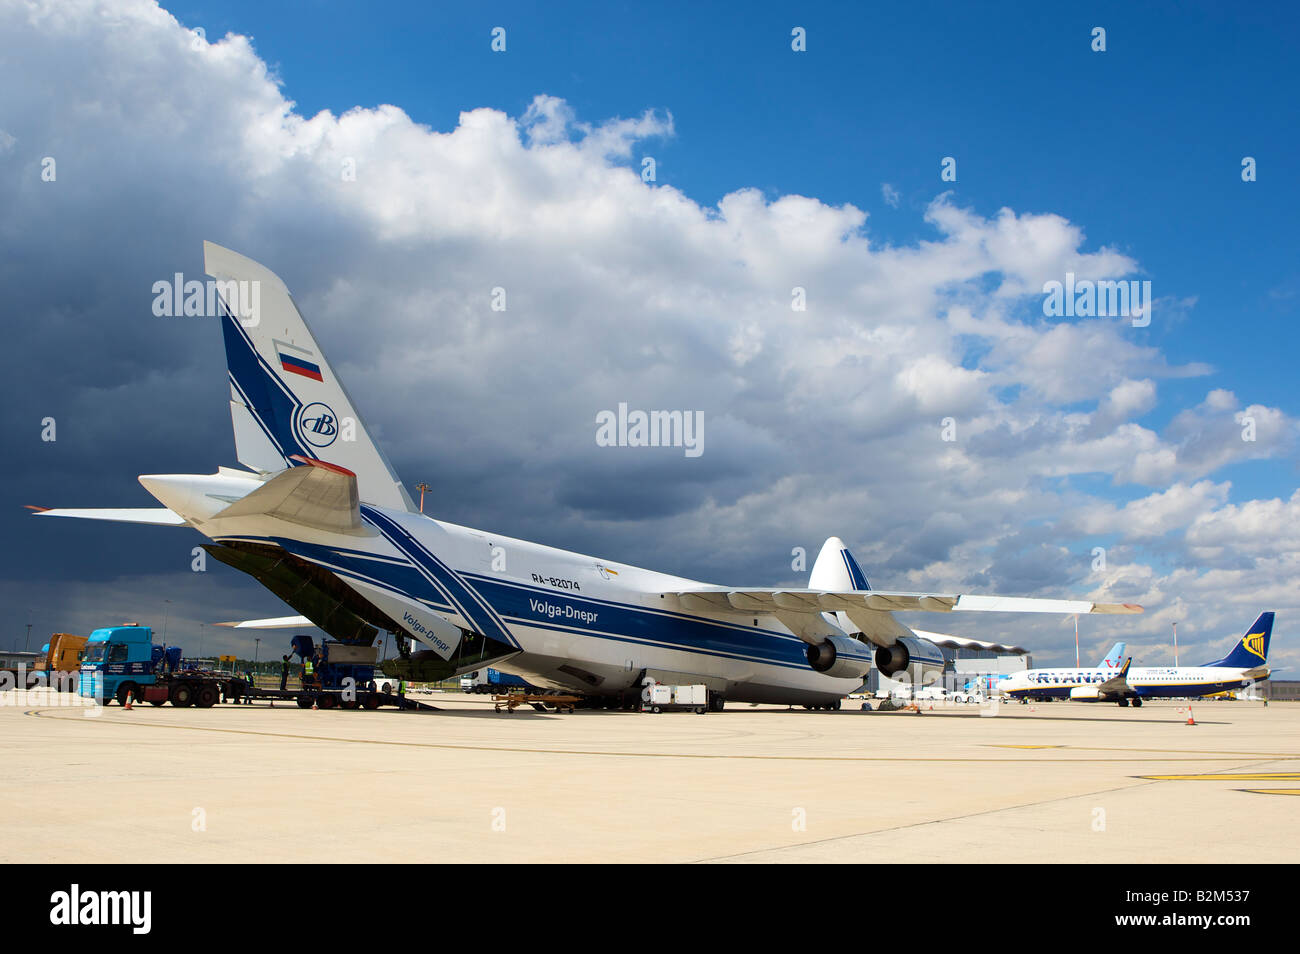 A giant Antanov 124, one of the largest cargo planes in the world, awaits cargo at Robin Hood Airport Doncaster Sheffield Stock Photo